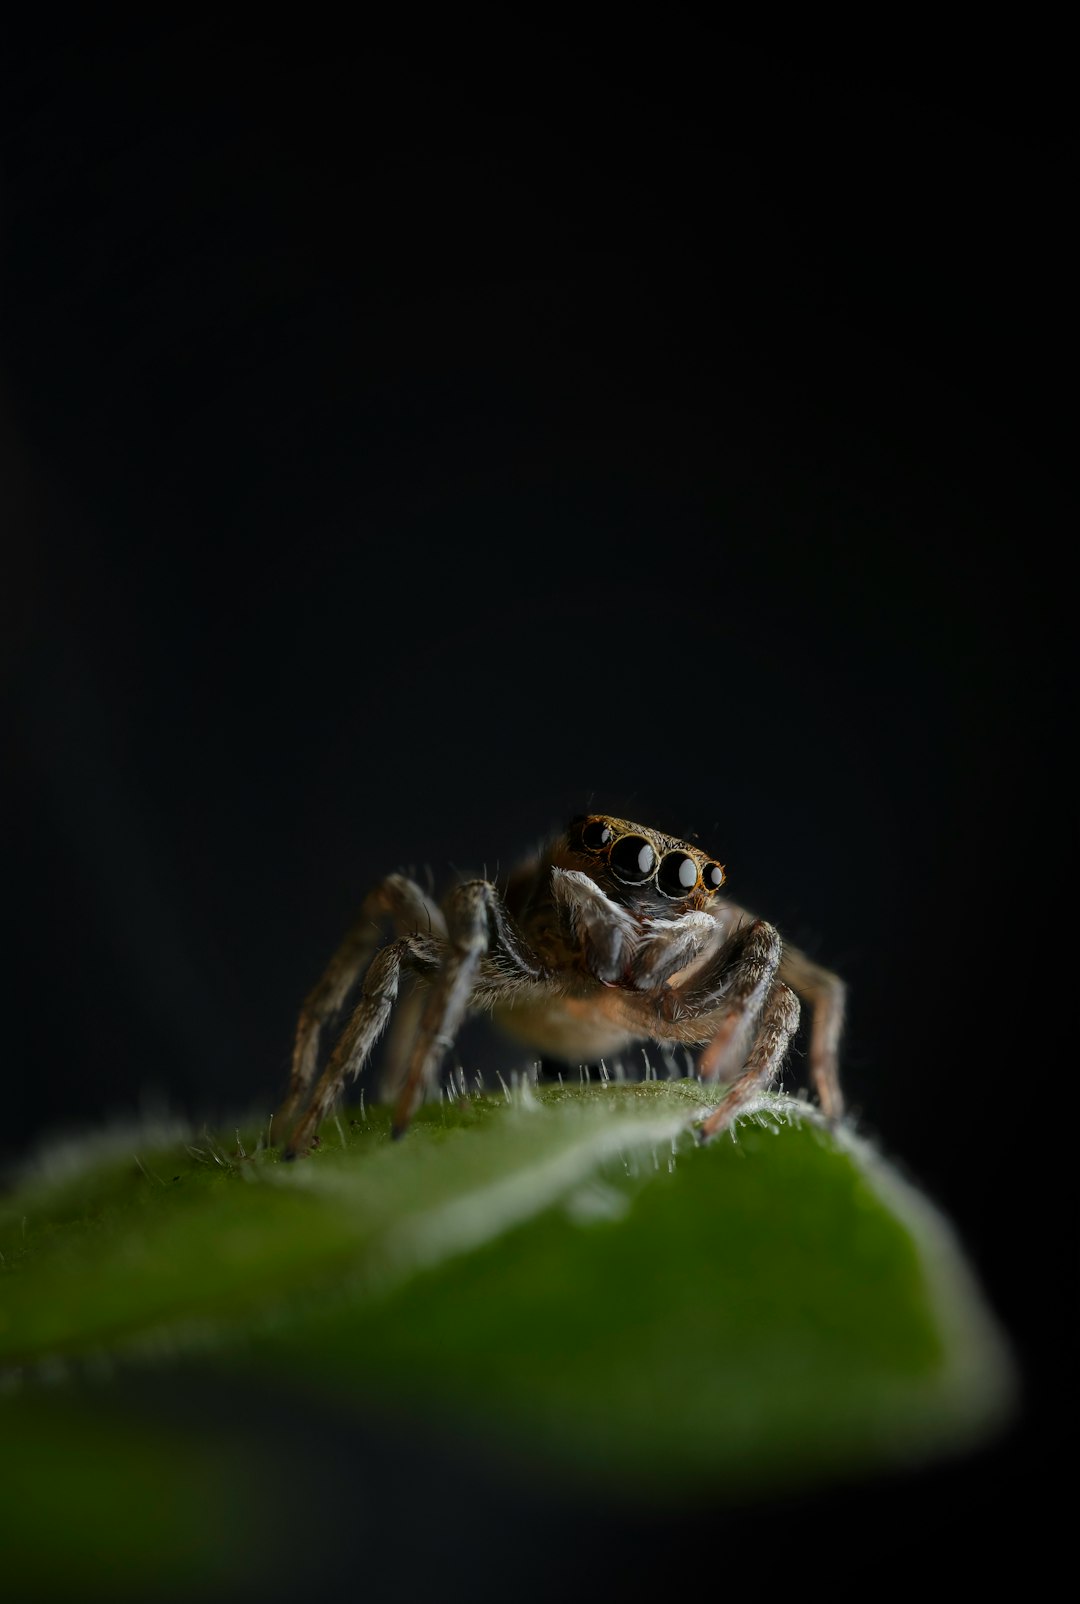 brown jumping spider on green leaf in close up photography